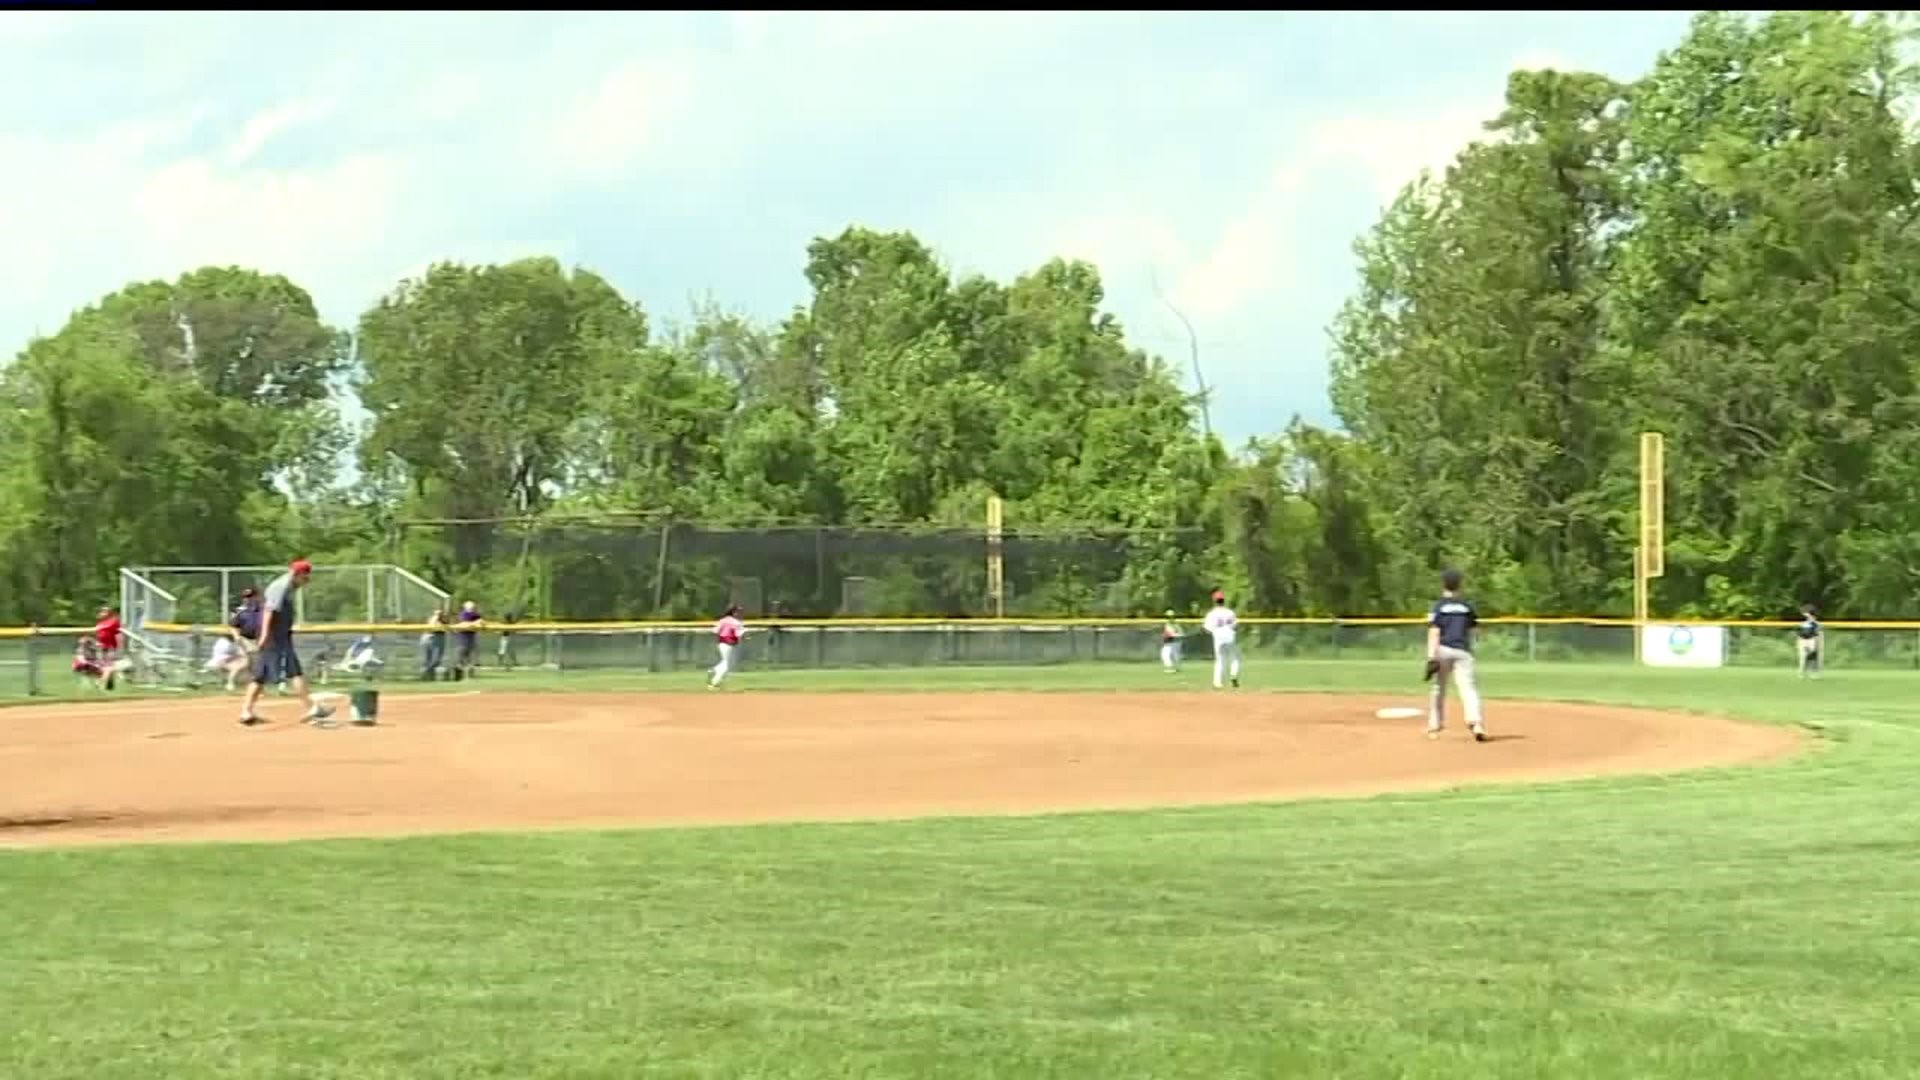 Local little leaguers heading to the White House